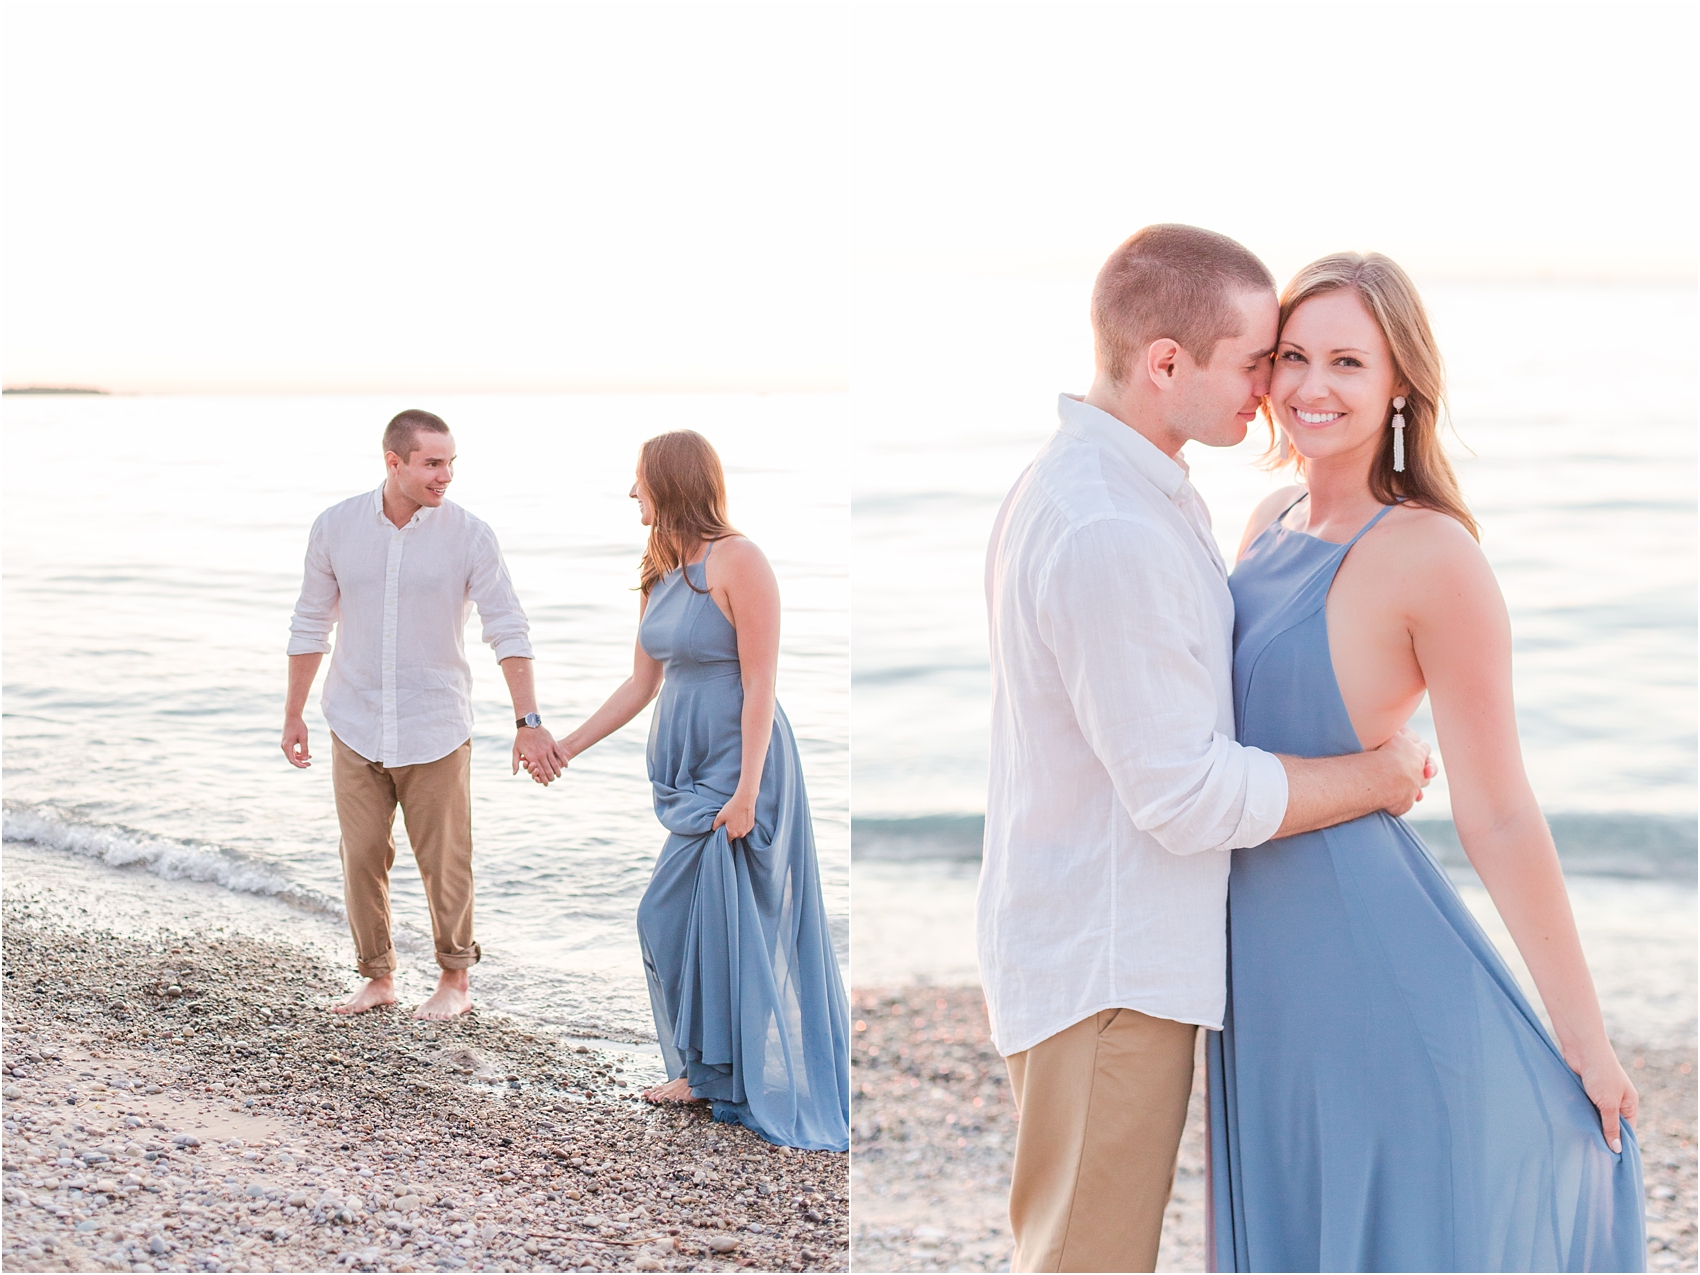 romantic-sunset-engagement-photos-at-michigan-beach-park-in-charlevoix-mi-by-courtney-carolyn-photography_0015.jpg